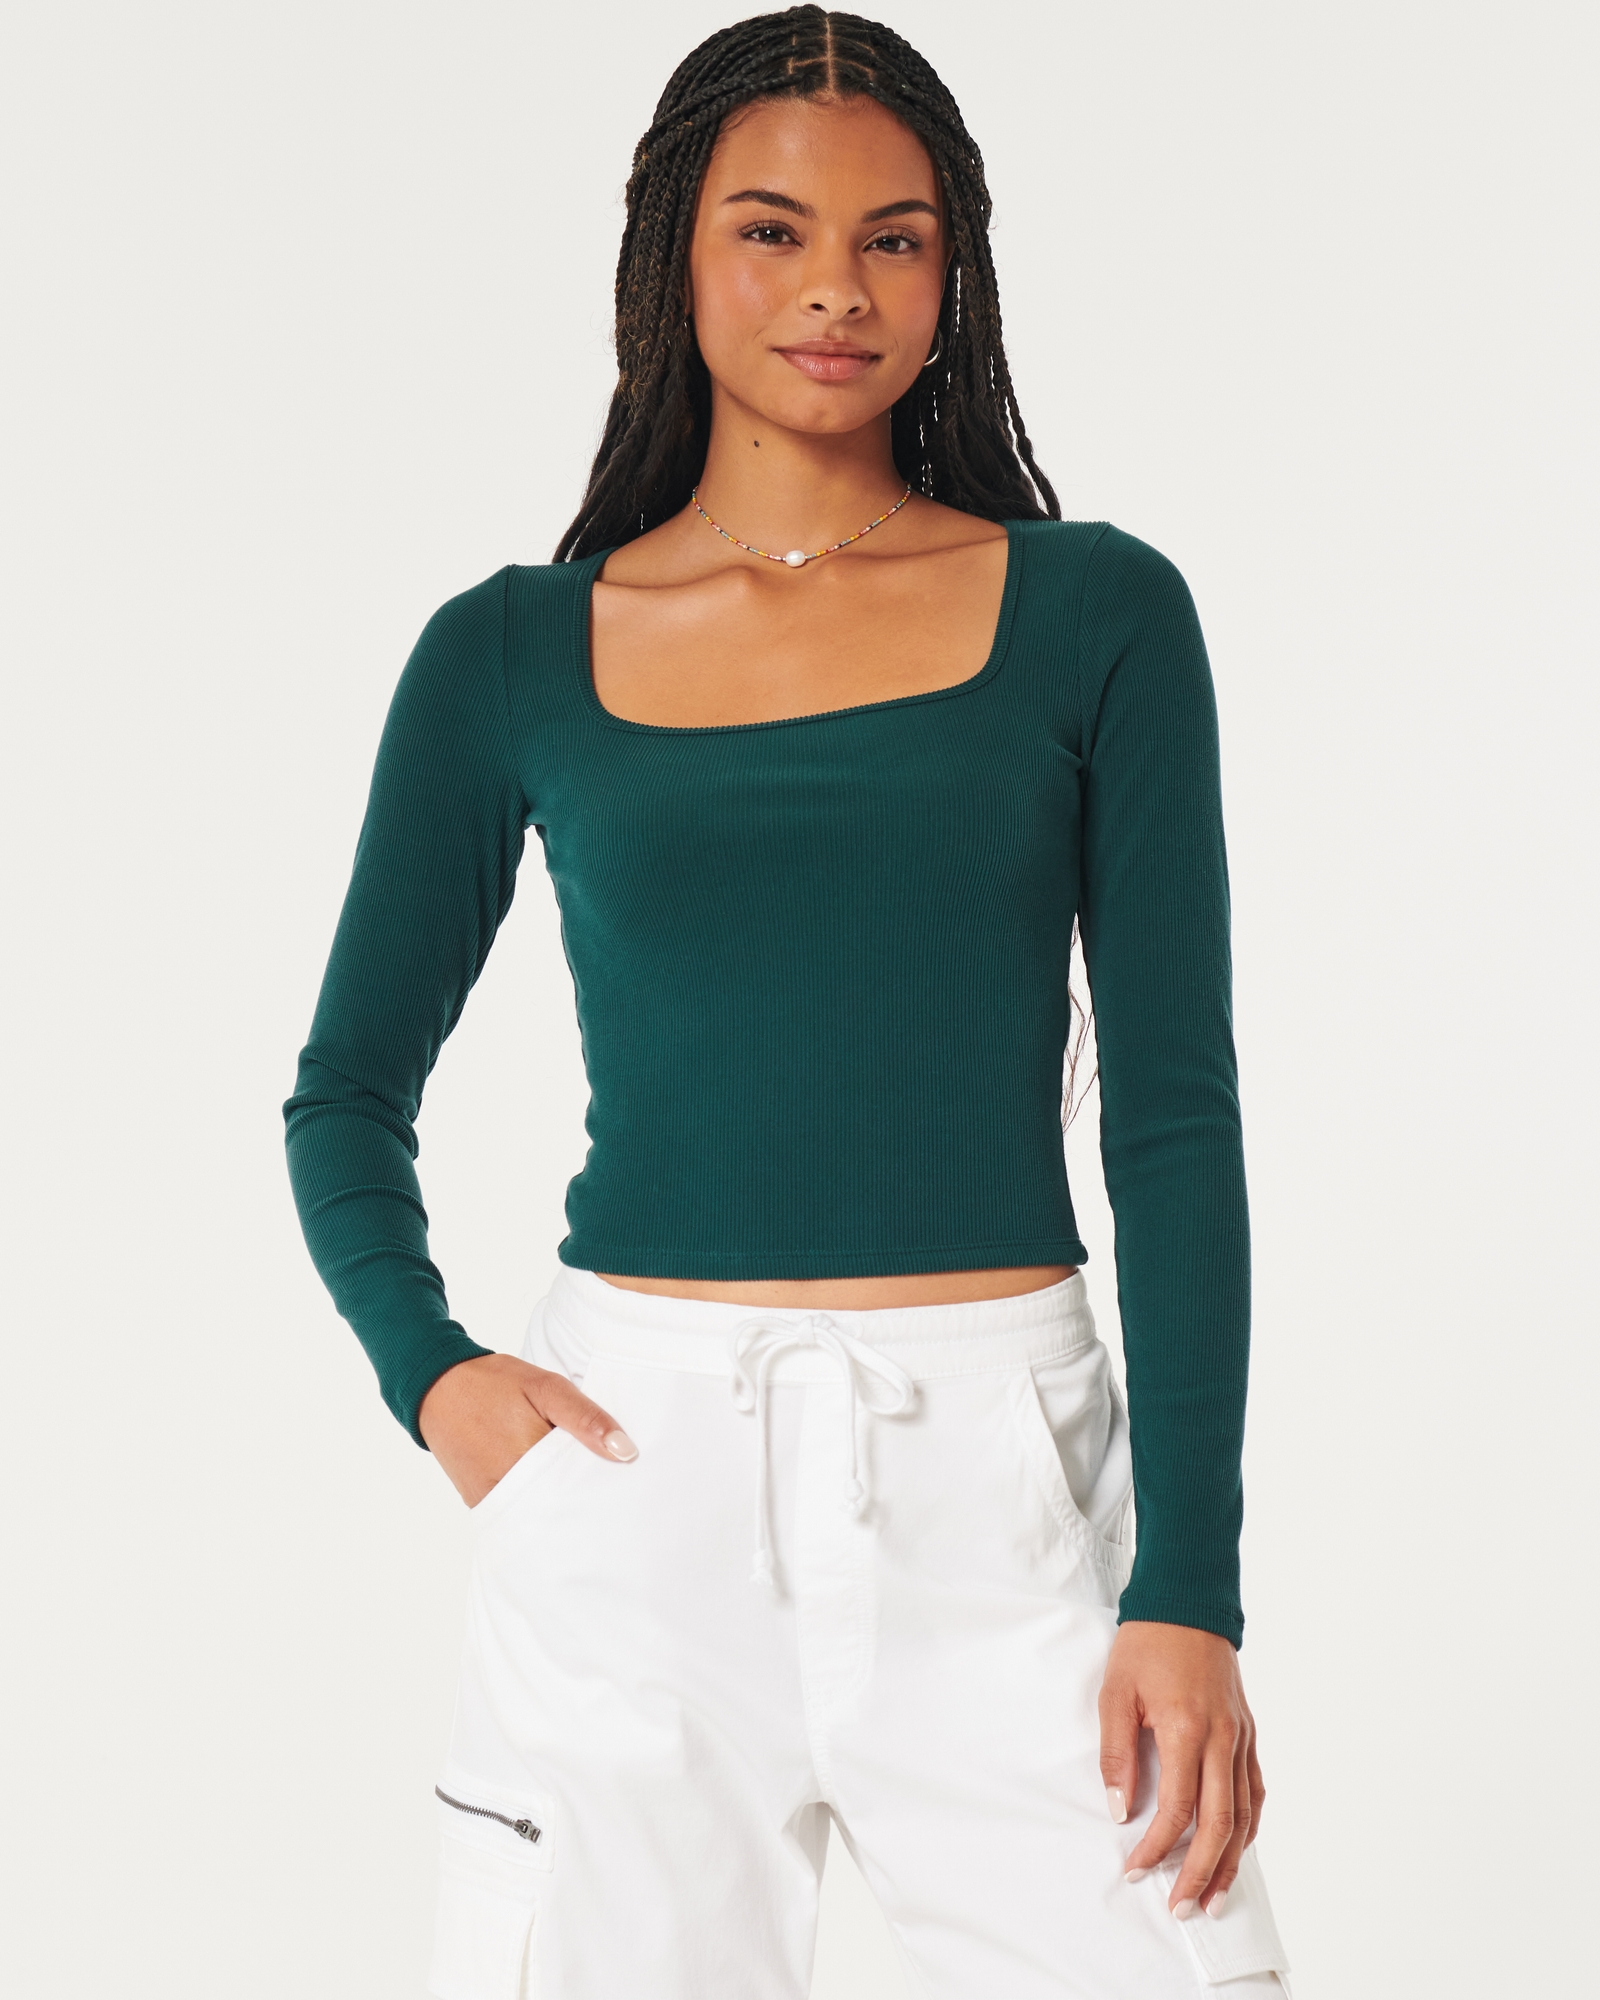 https://img.hollisterco.com/is/image/anf/KIC_339-3285-0025-300_model1.jpg?policy=product-extra-large